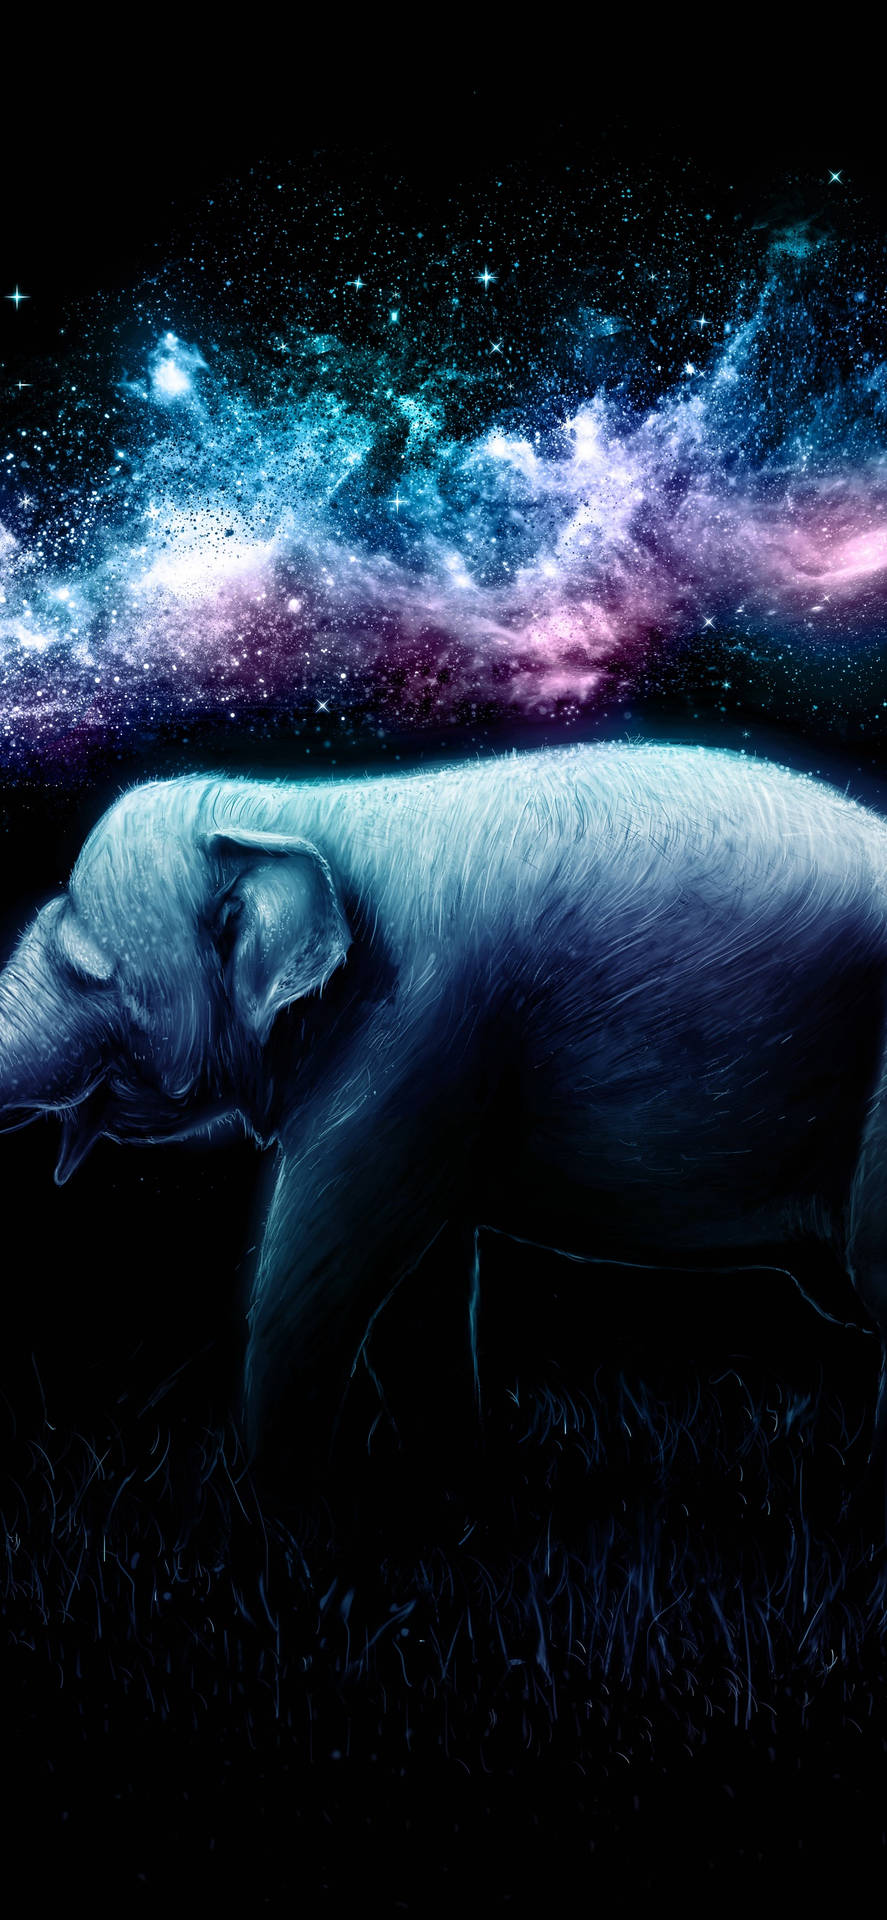 An Elephant Standing In The Grass With Stars In The Background Wallpaper